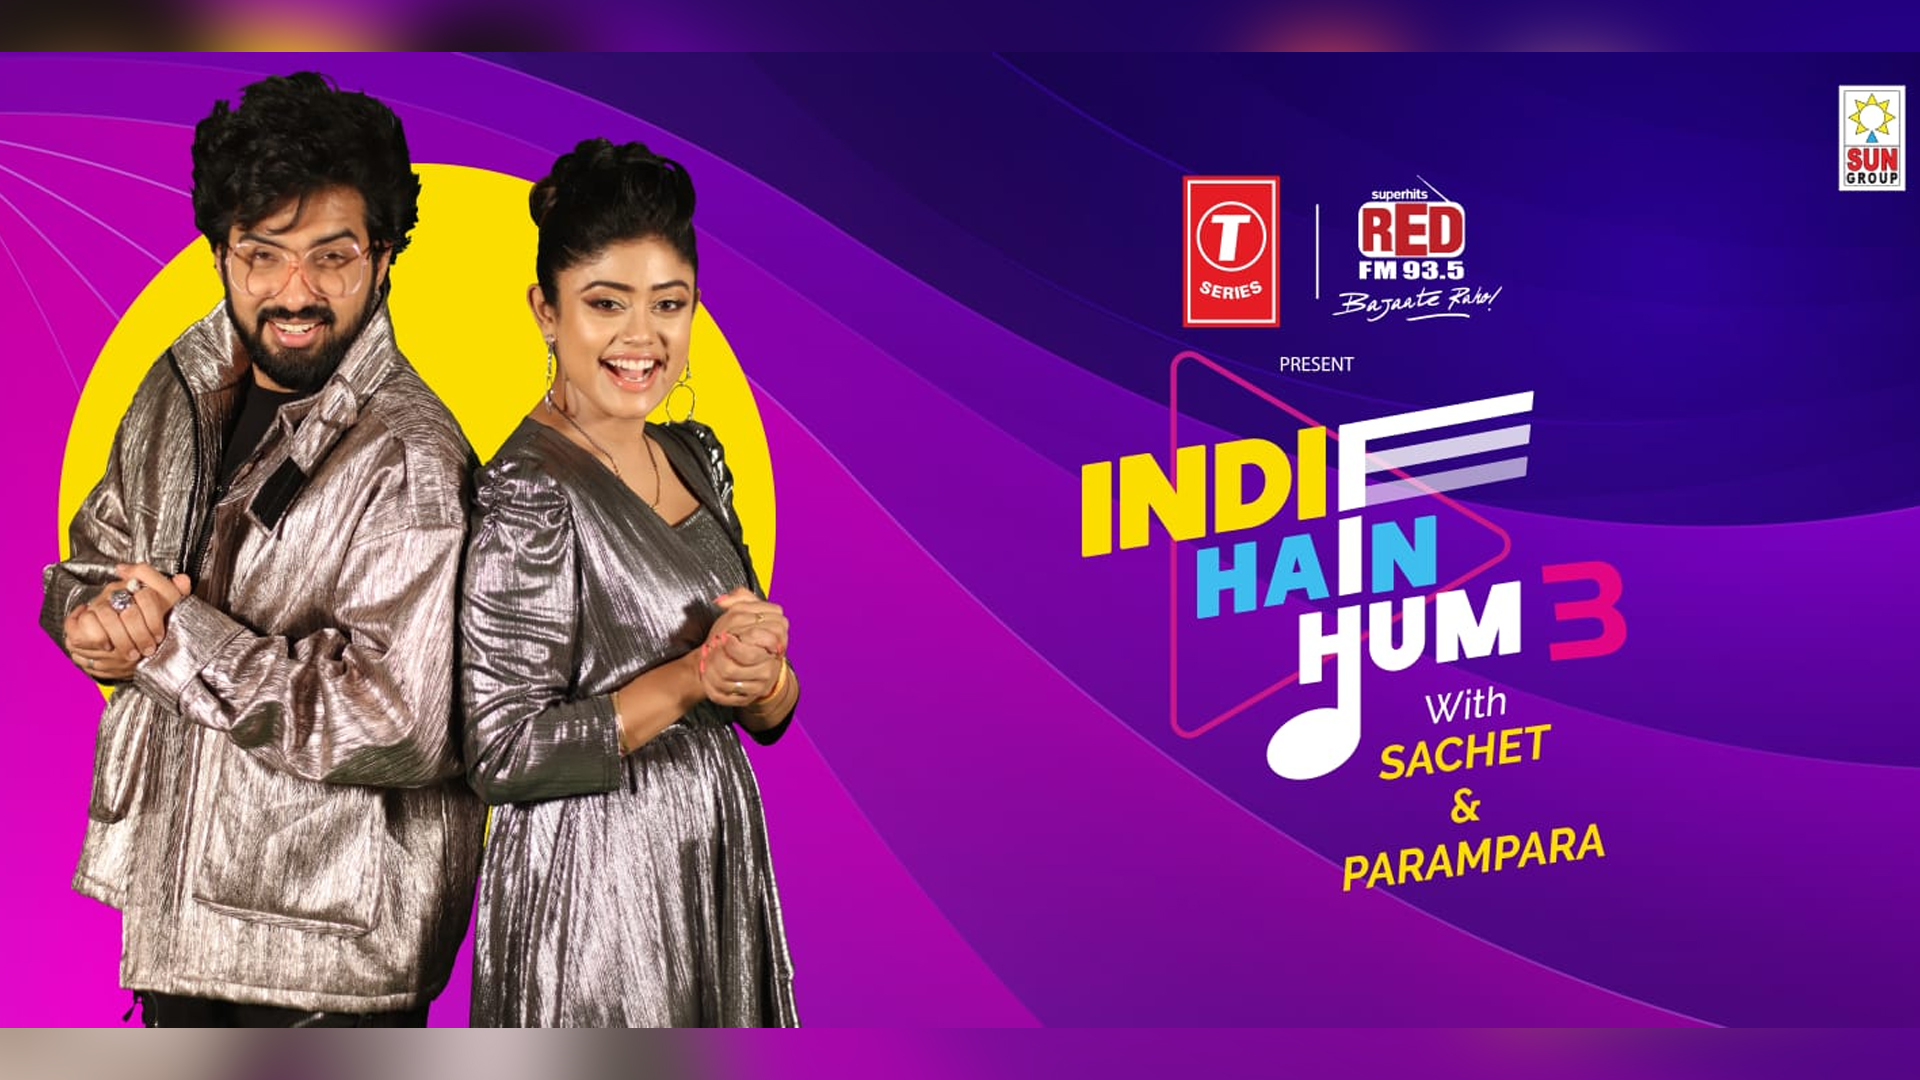 T-Series and Red FM gear up for the third season of Indie Hai Hum with Sachet Parampara